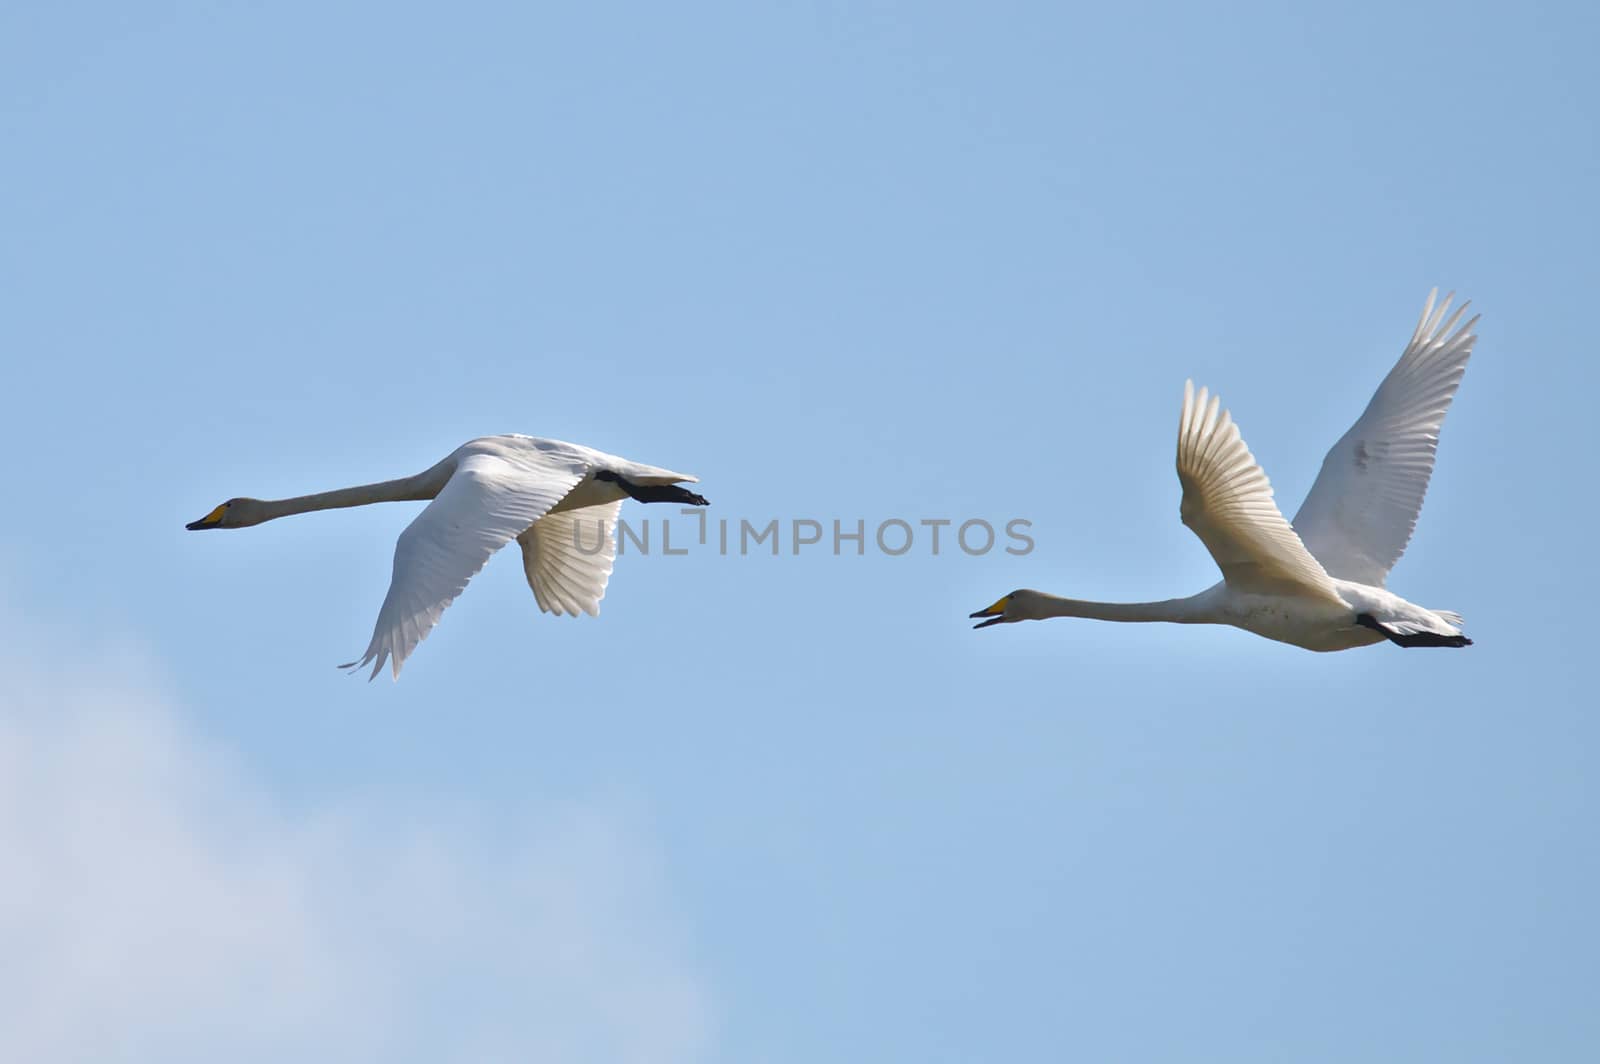 White Gooses in flight. Two gooses flying together, blue sky as a background.